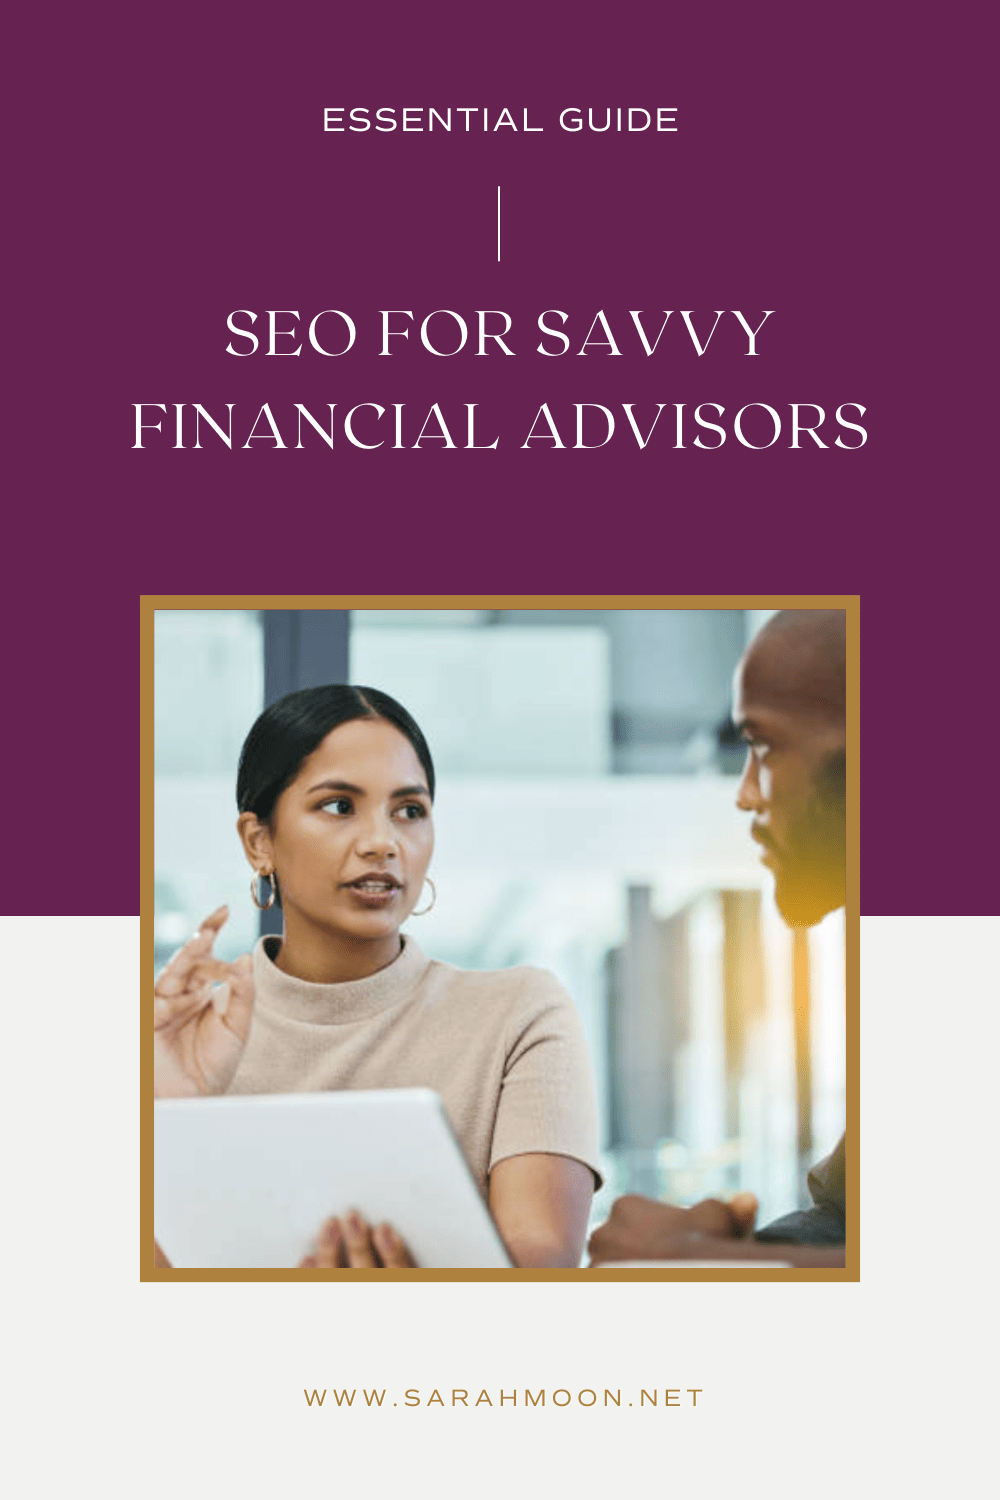 Essential Guide - SEO for Savvy Financial Advisors from Sarah Moon and Co; purple and white graphic with a man and woman discussing paperwork